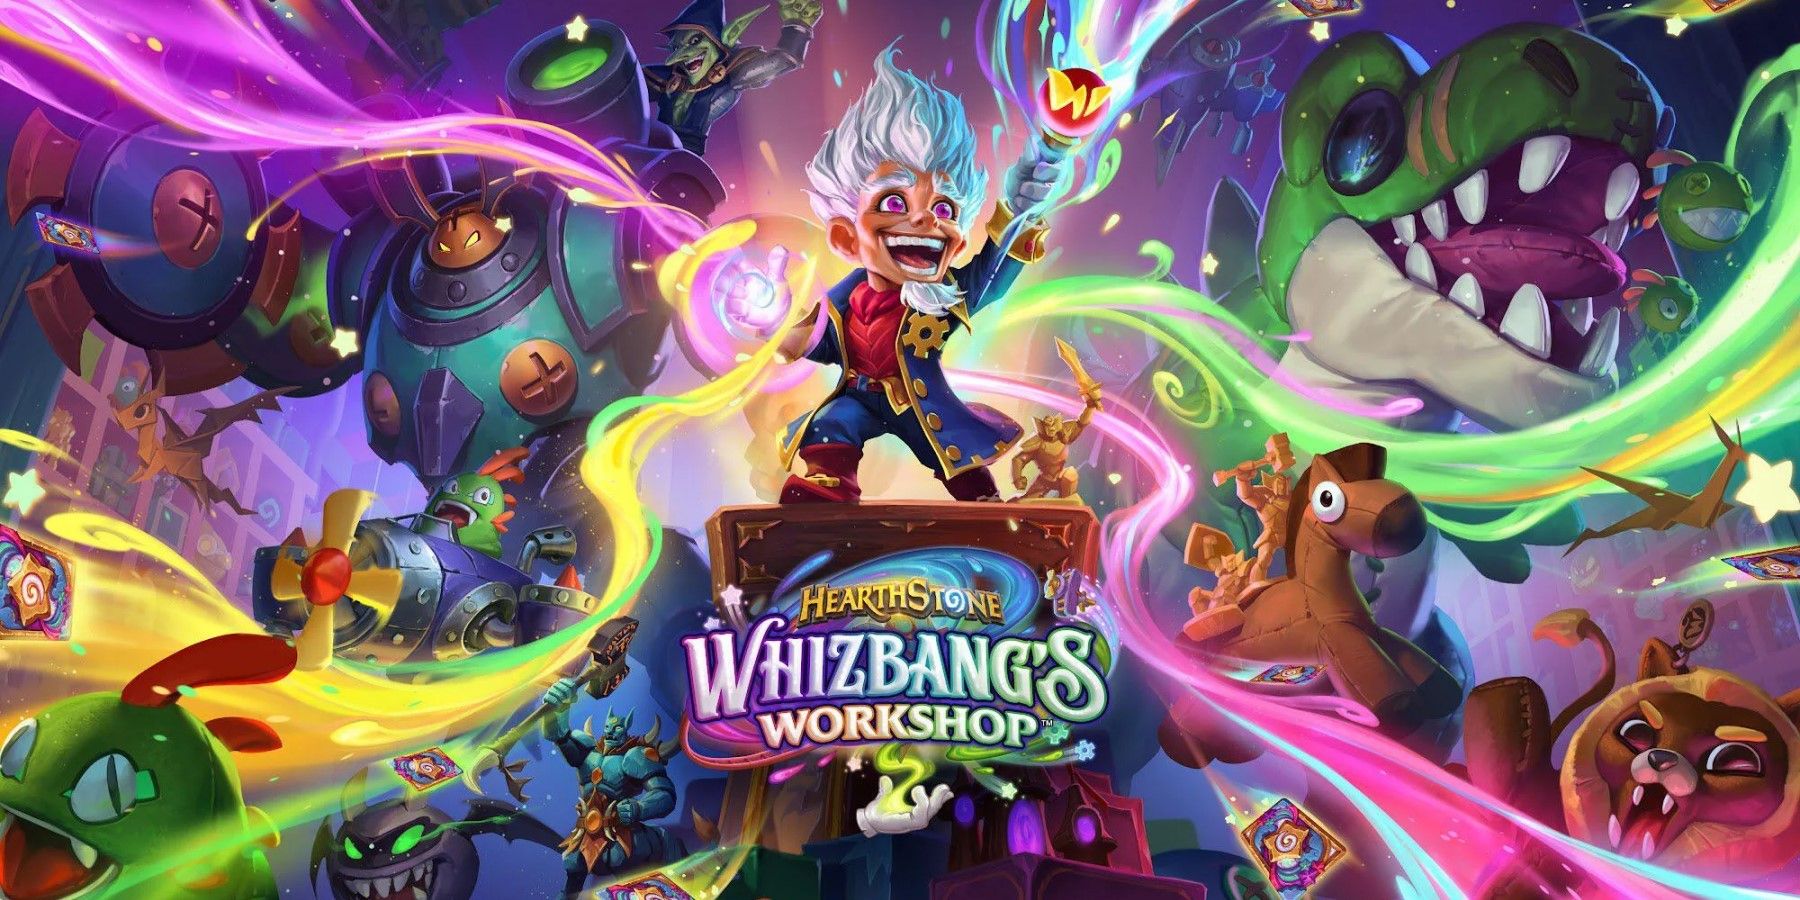 the key art from Whizbang's Workshop hearthstone expansion